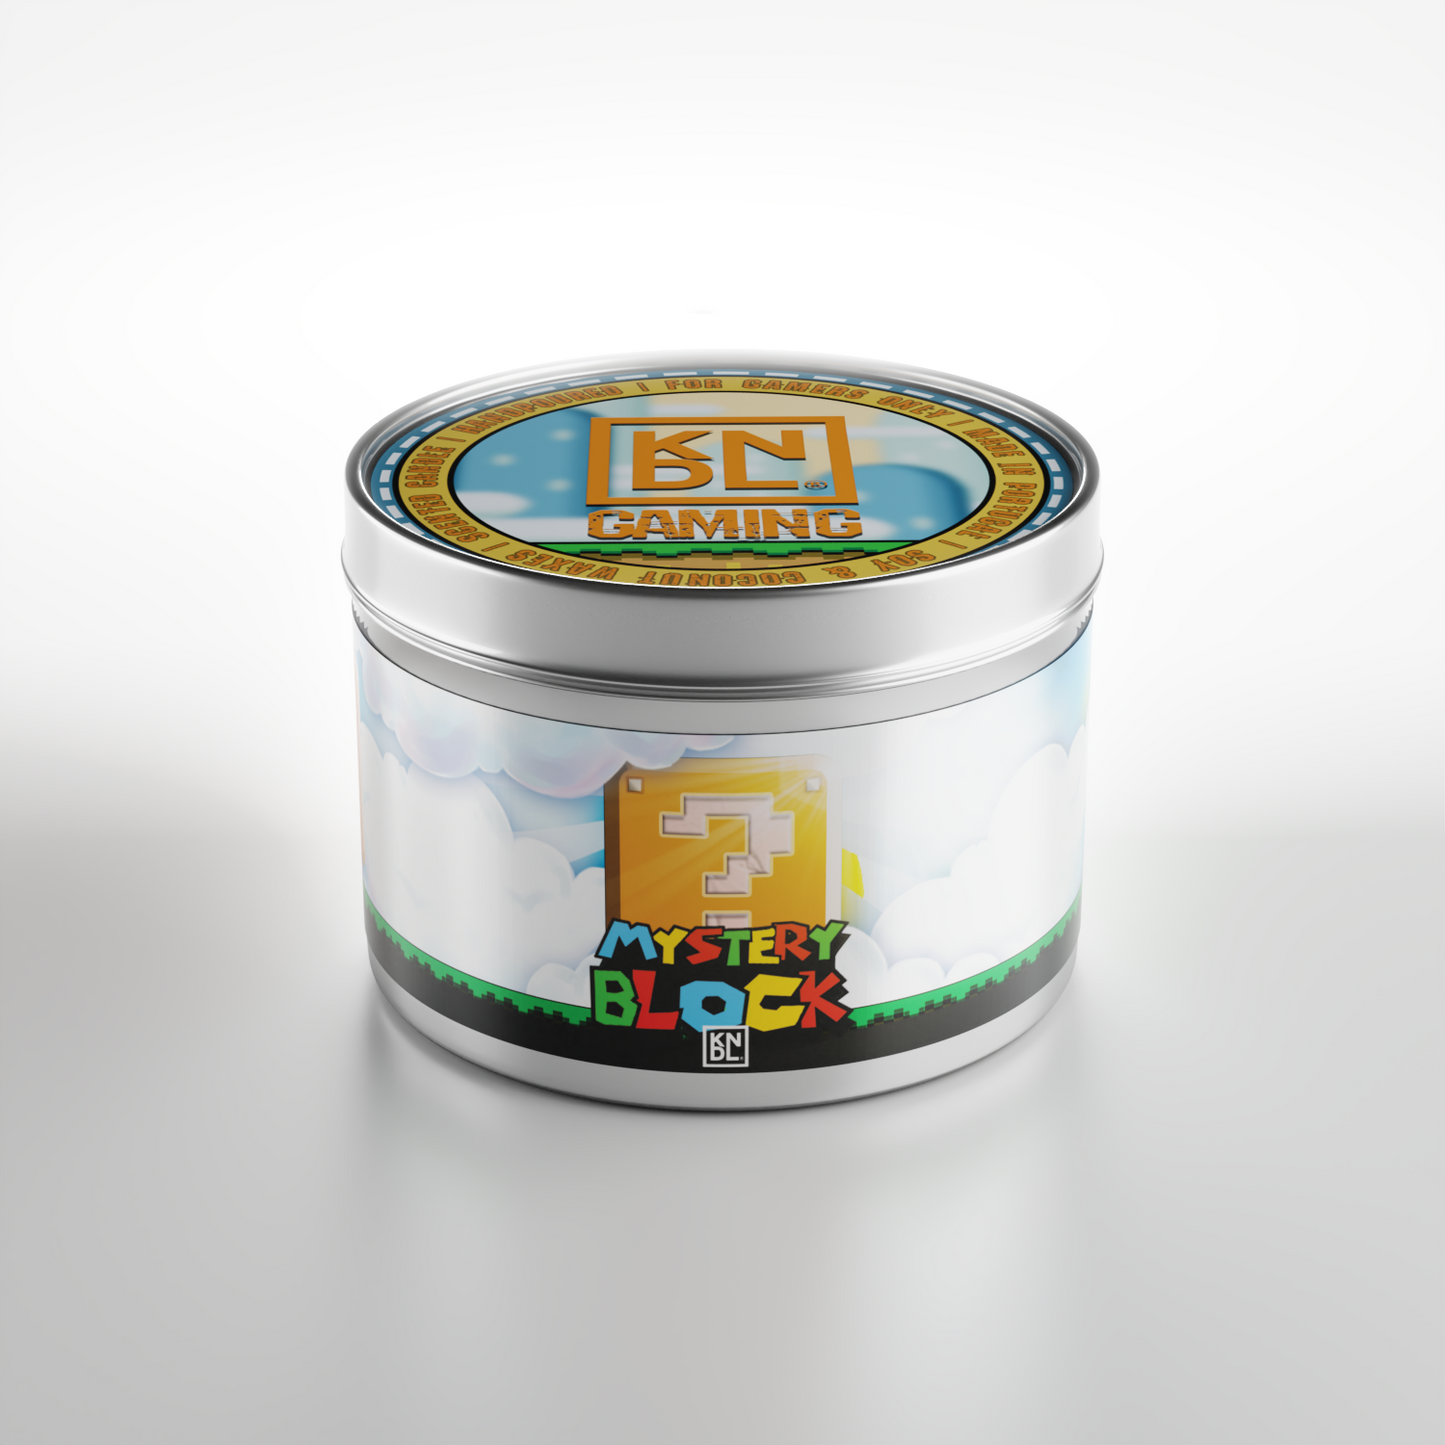 TIN NR 30 | MYSTERY BLOCK | SUPER MARIO INSPIRED SCENTED CANDLE